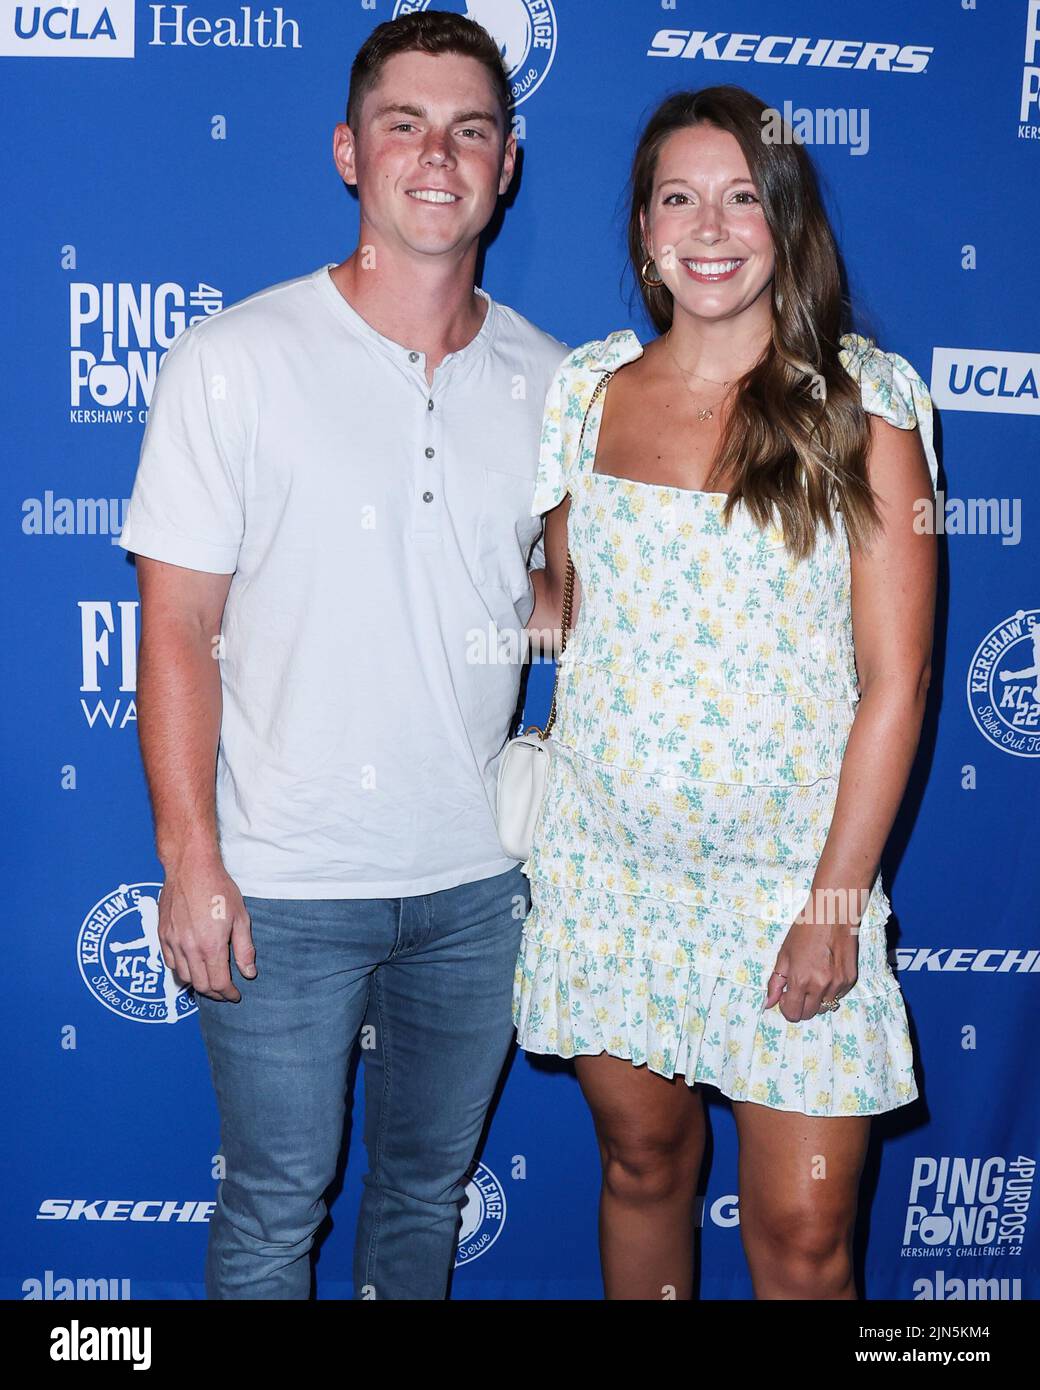 Los Angeles, United States. 08th Aug, 2022. ELYSIAN PARK, LOS ANGELES, CALIFORNIA, USA - AUGUST 08: American professional baseball catcher for the Los Angeles Dodgers of Major League Baseball Will Smith and wife Cara Smith arrive at Kershaw's Challenge Ping Pong 4 Purpose 2022 held at Dodger Stadium on August 8, 2022 in Elysian Park, Los Angeles, California, United States. (Photo by Xavier Collin/Image Press Agency) Credit: Image Press Agency/Alamy Live News Stock Photo